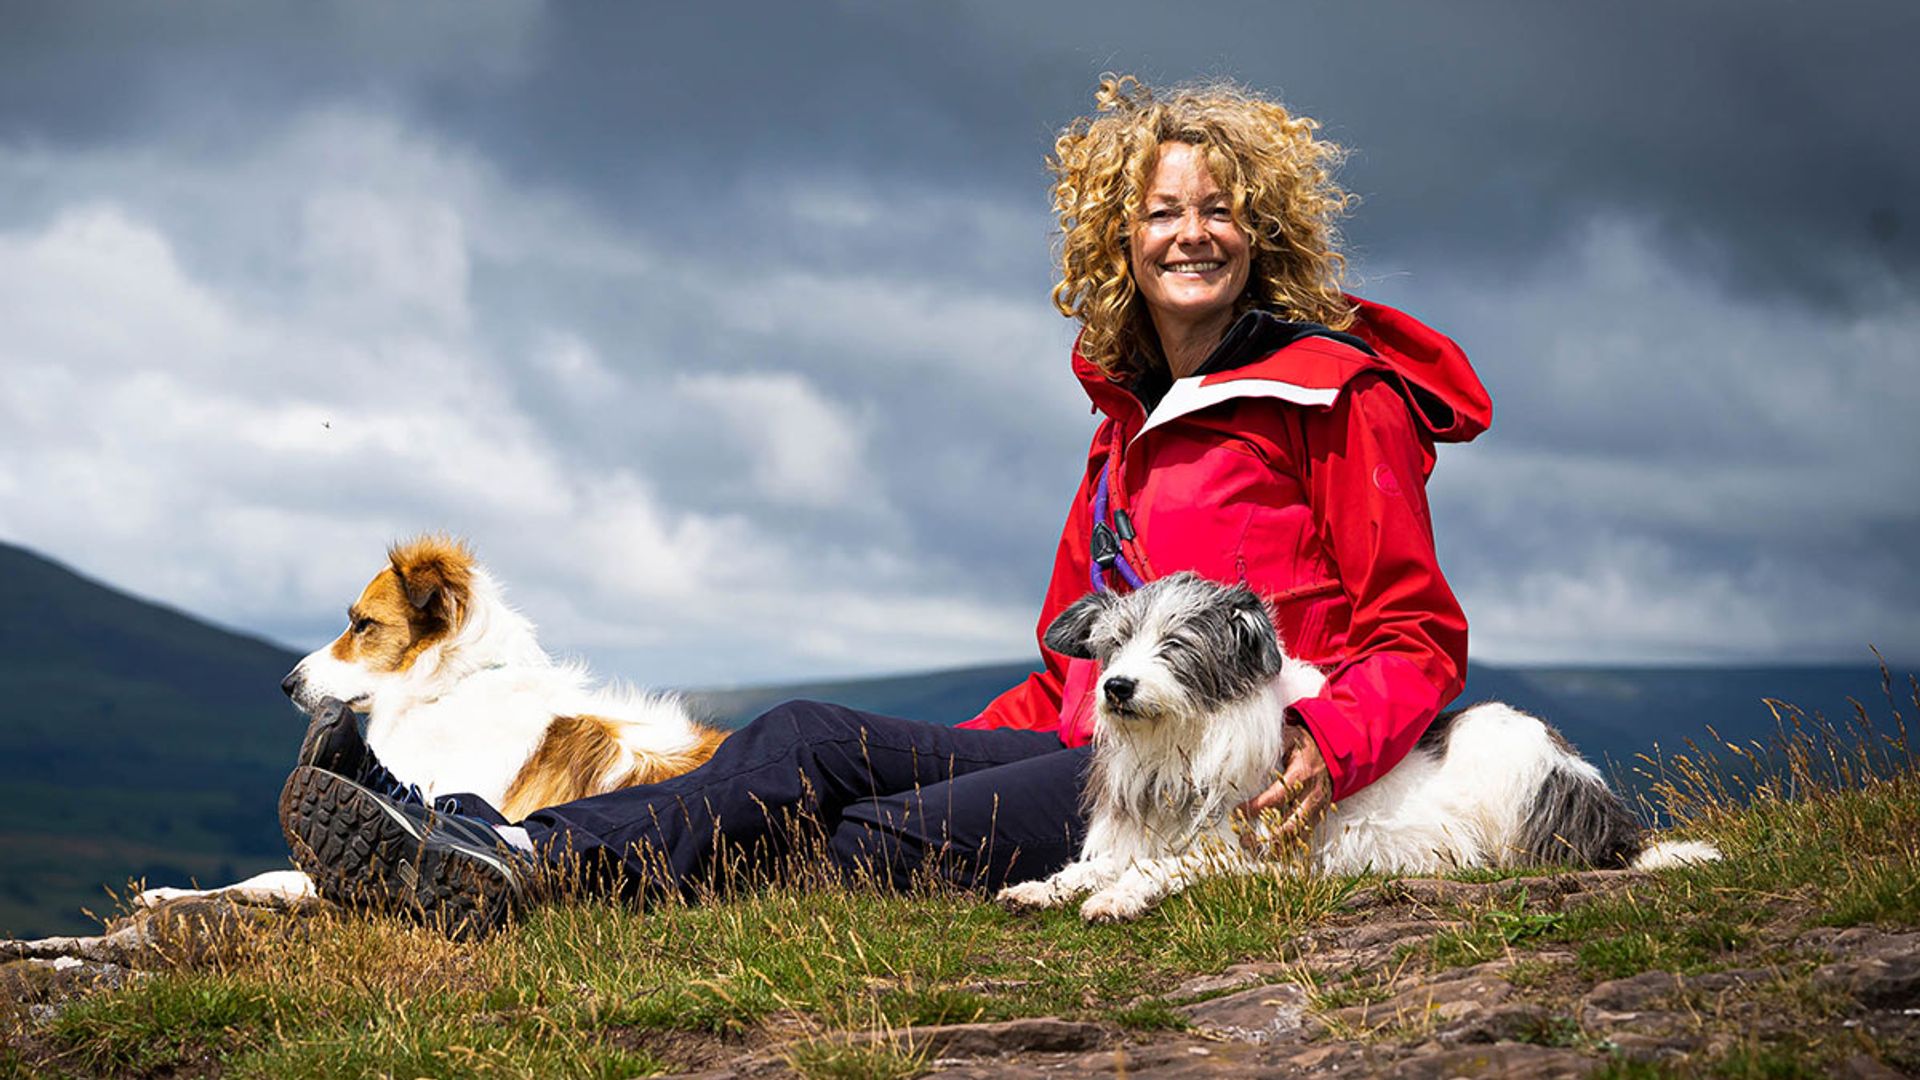 Escape to the Kate Humble why her husband is a key figure on the show | HELLO!